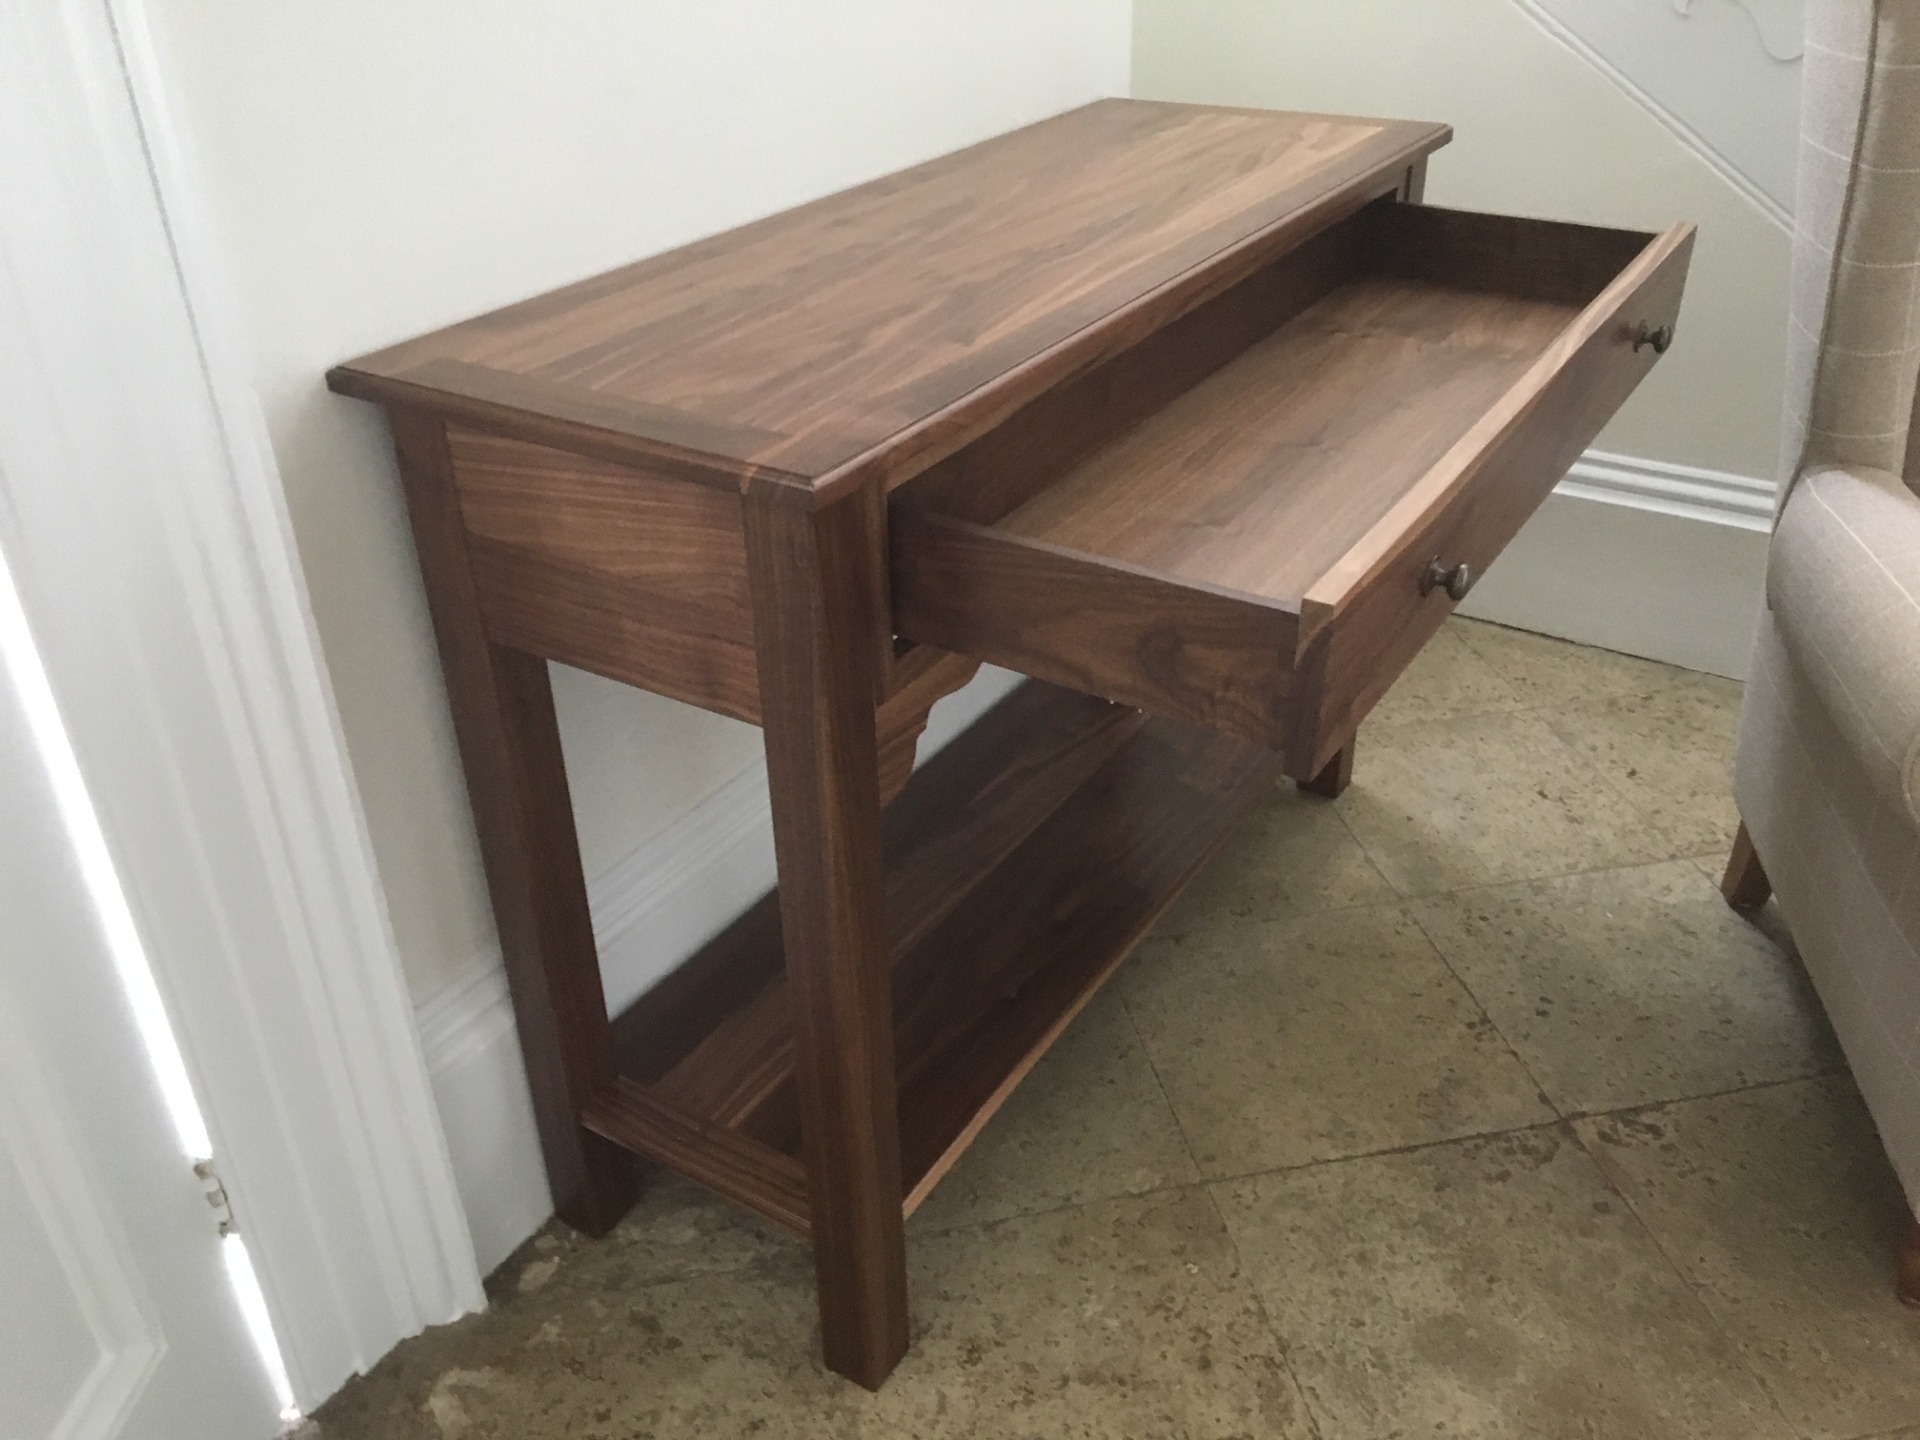 Bespoke console table